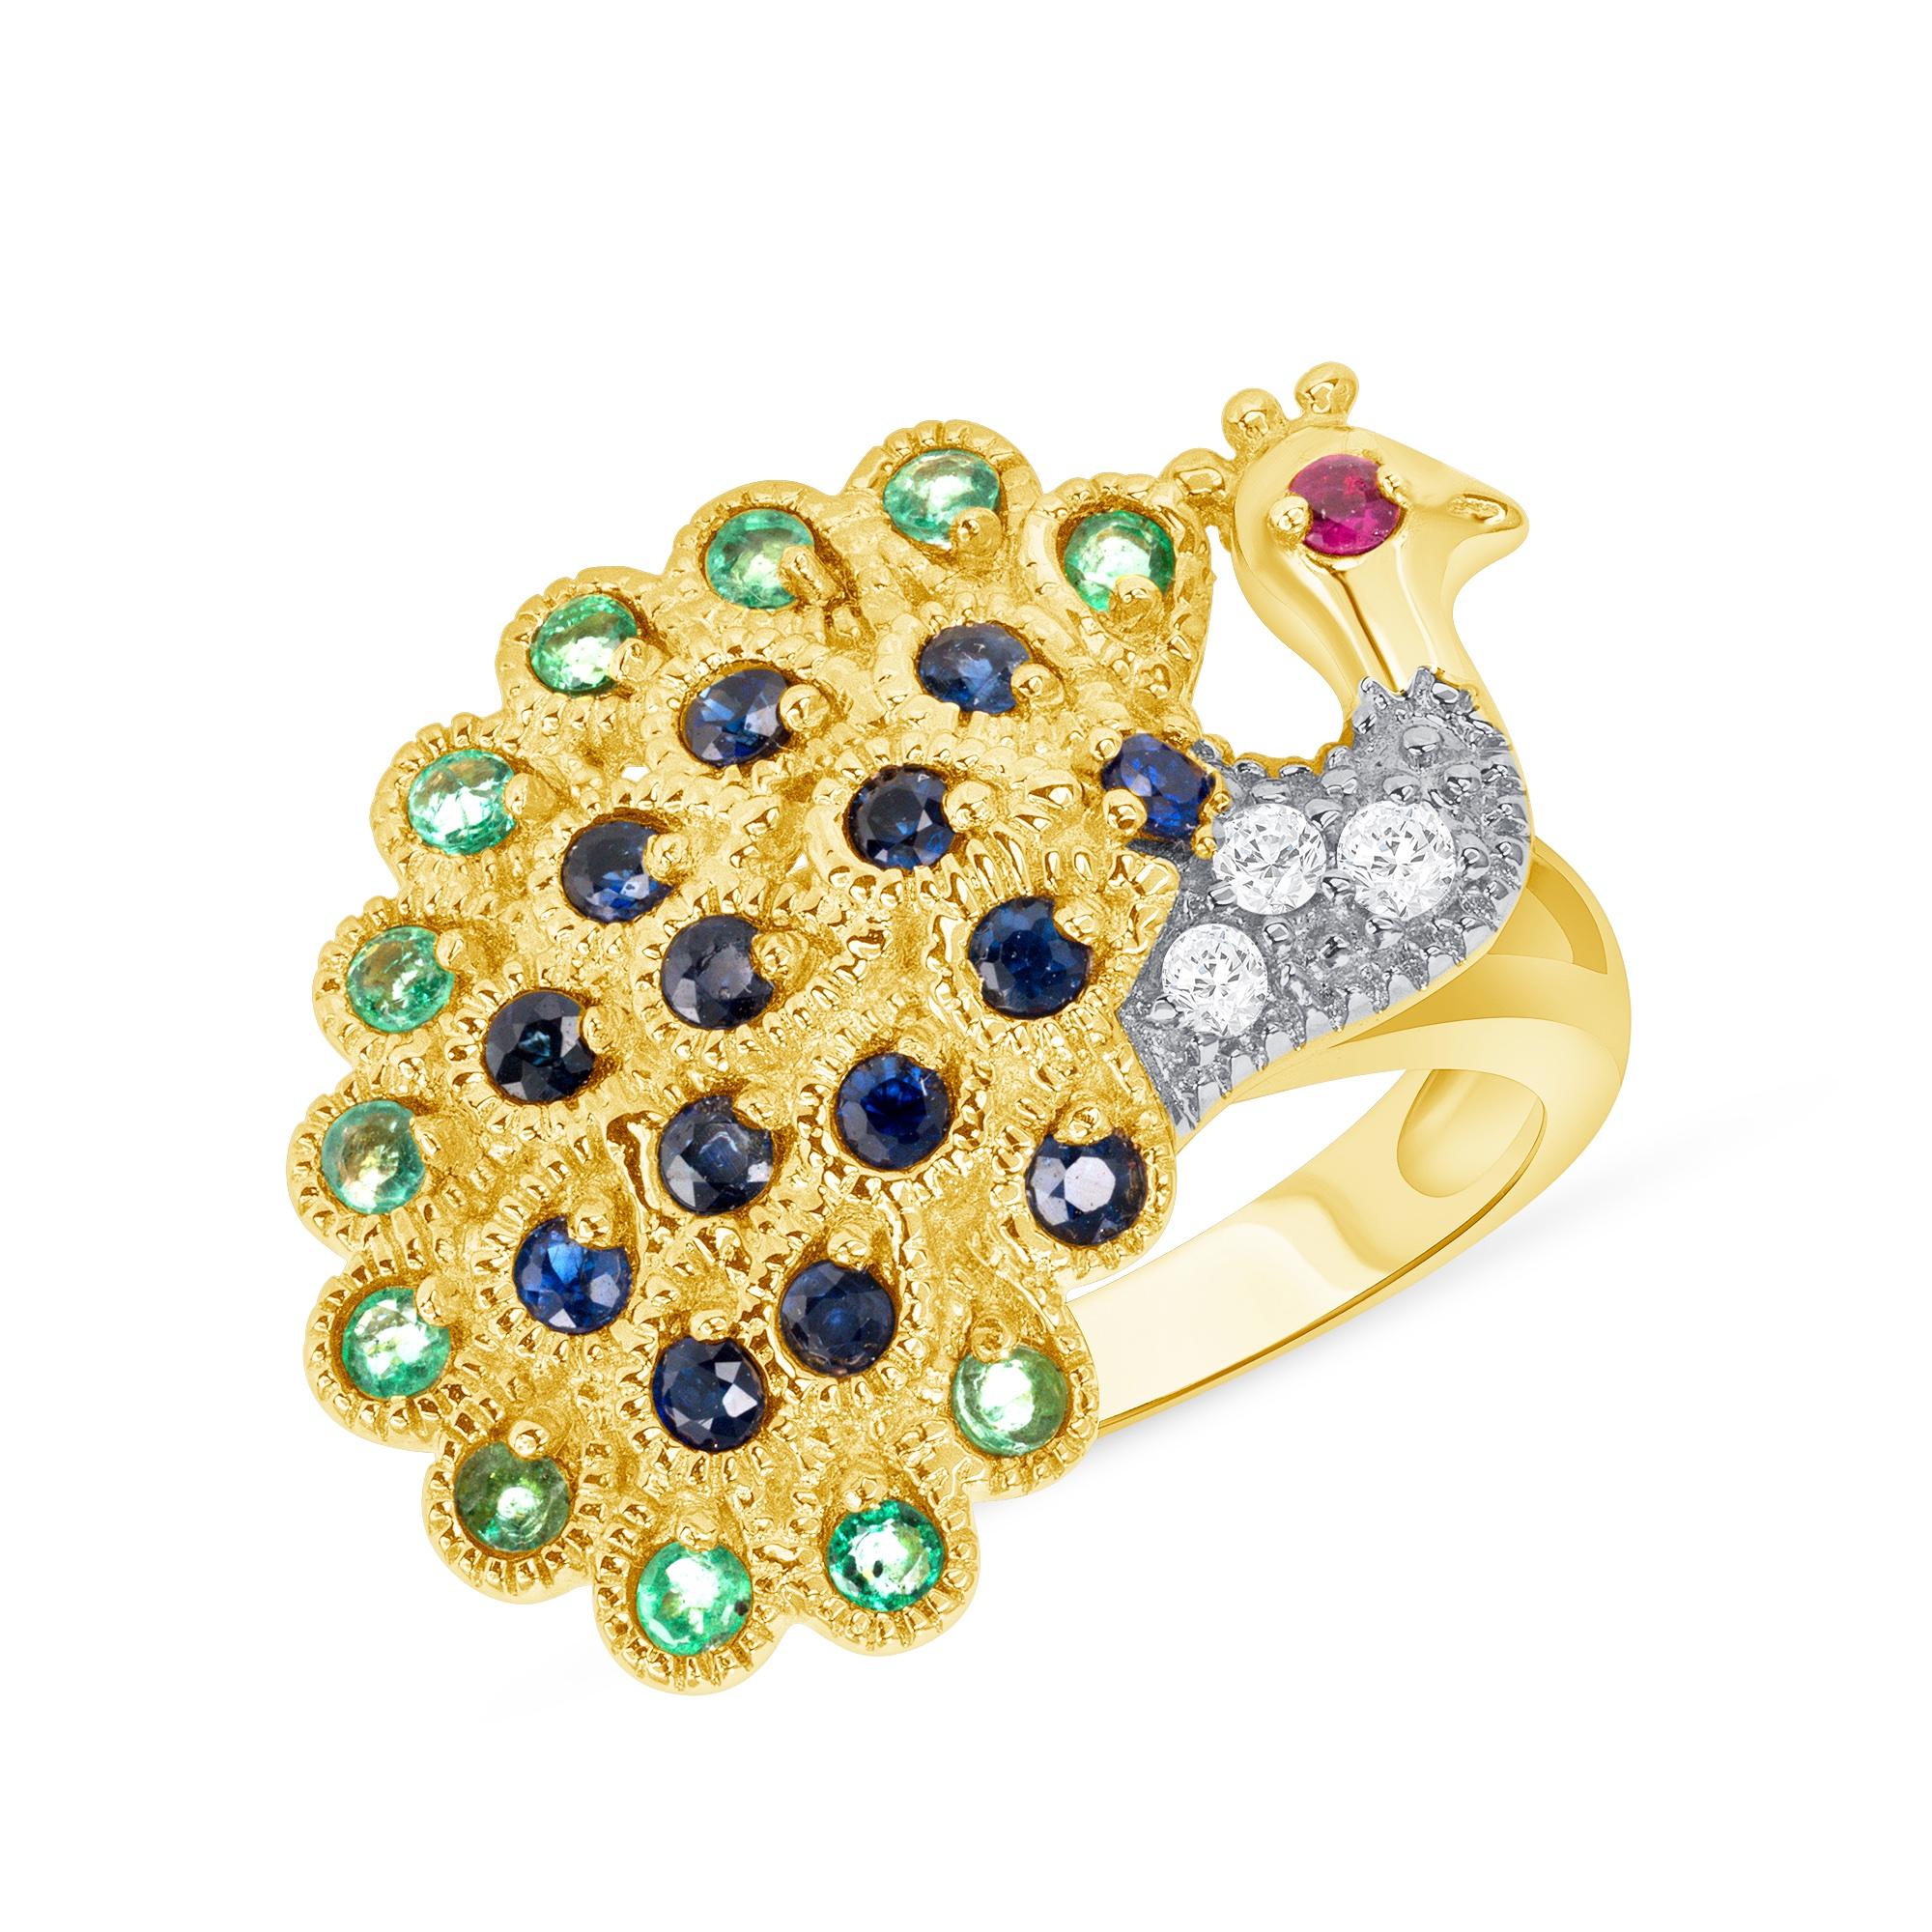 Sapphire Diamond Emerald Ruby Yellow Gold Peacock Cluster Ring, In Stock.

This peacock-shaped ring made out of gemstones is a colorful cluster ring! It has a 0.24-carat total weight of emeralds, a 0.30-carat total weight of sapphires, a 0.08-carat